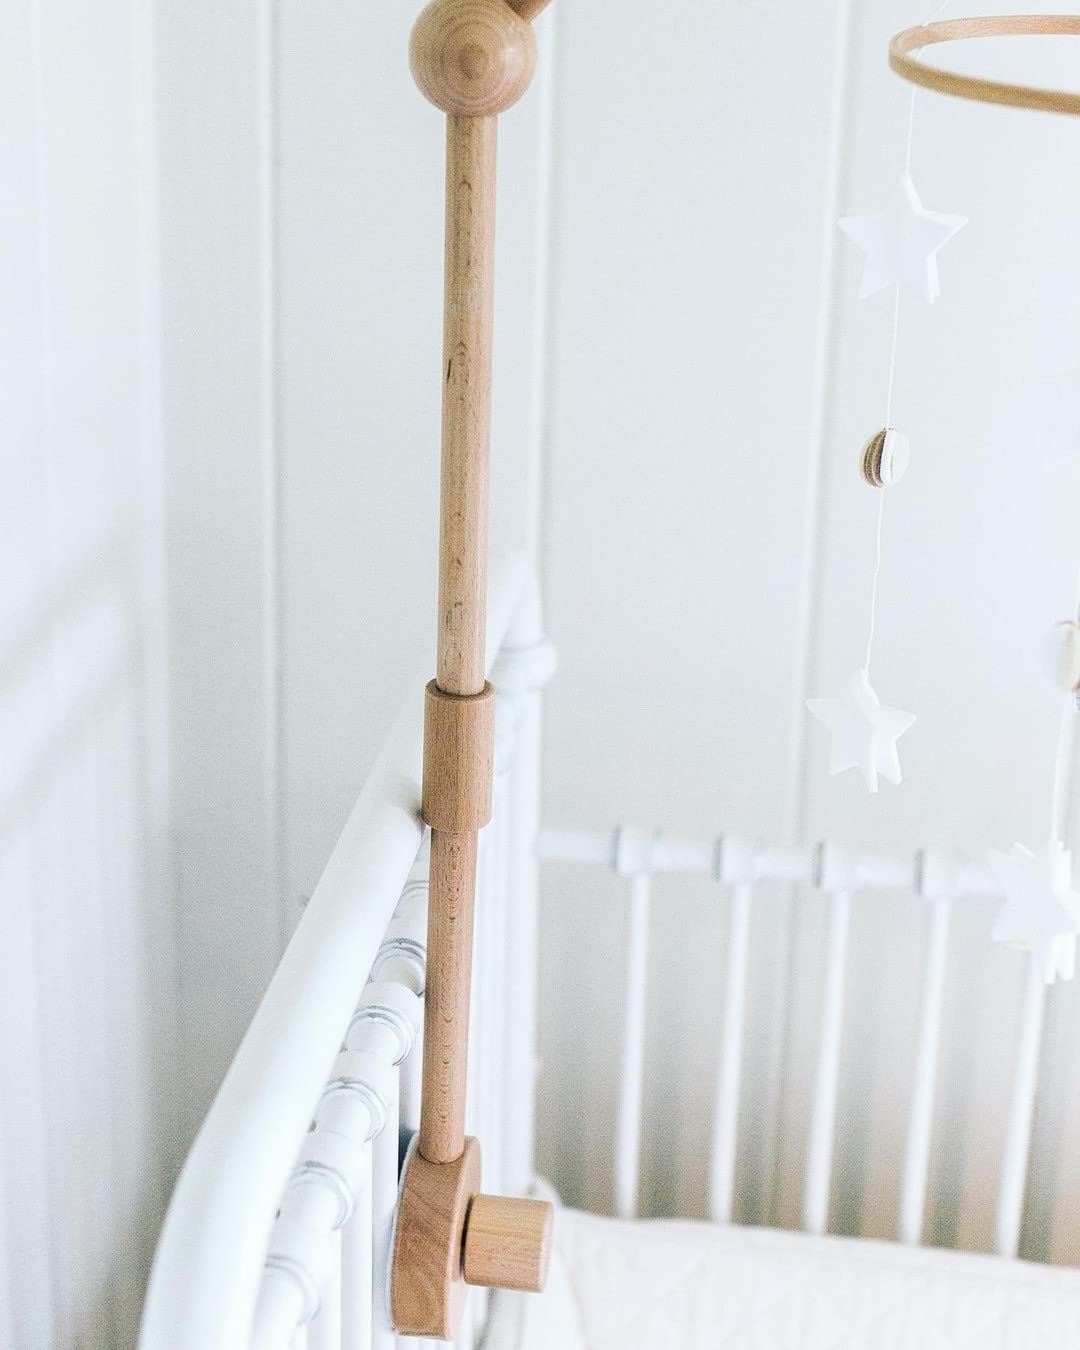 Sorrel + Fern Wooden Baby Crib Mobile Arm - Baby Mobile Holder Arm (31 inch, 100% Natural Beech Wood) - Strong Anti Slip Attachment - Nursery Décor